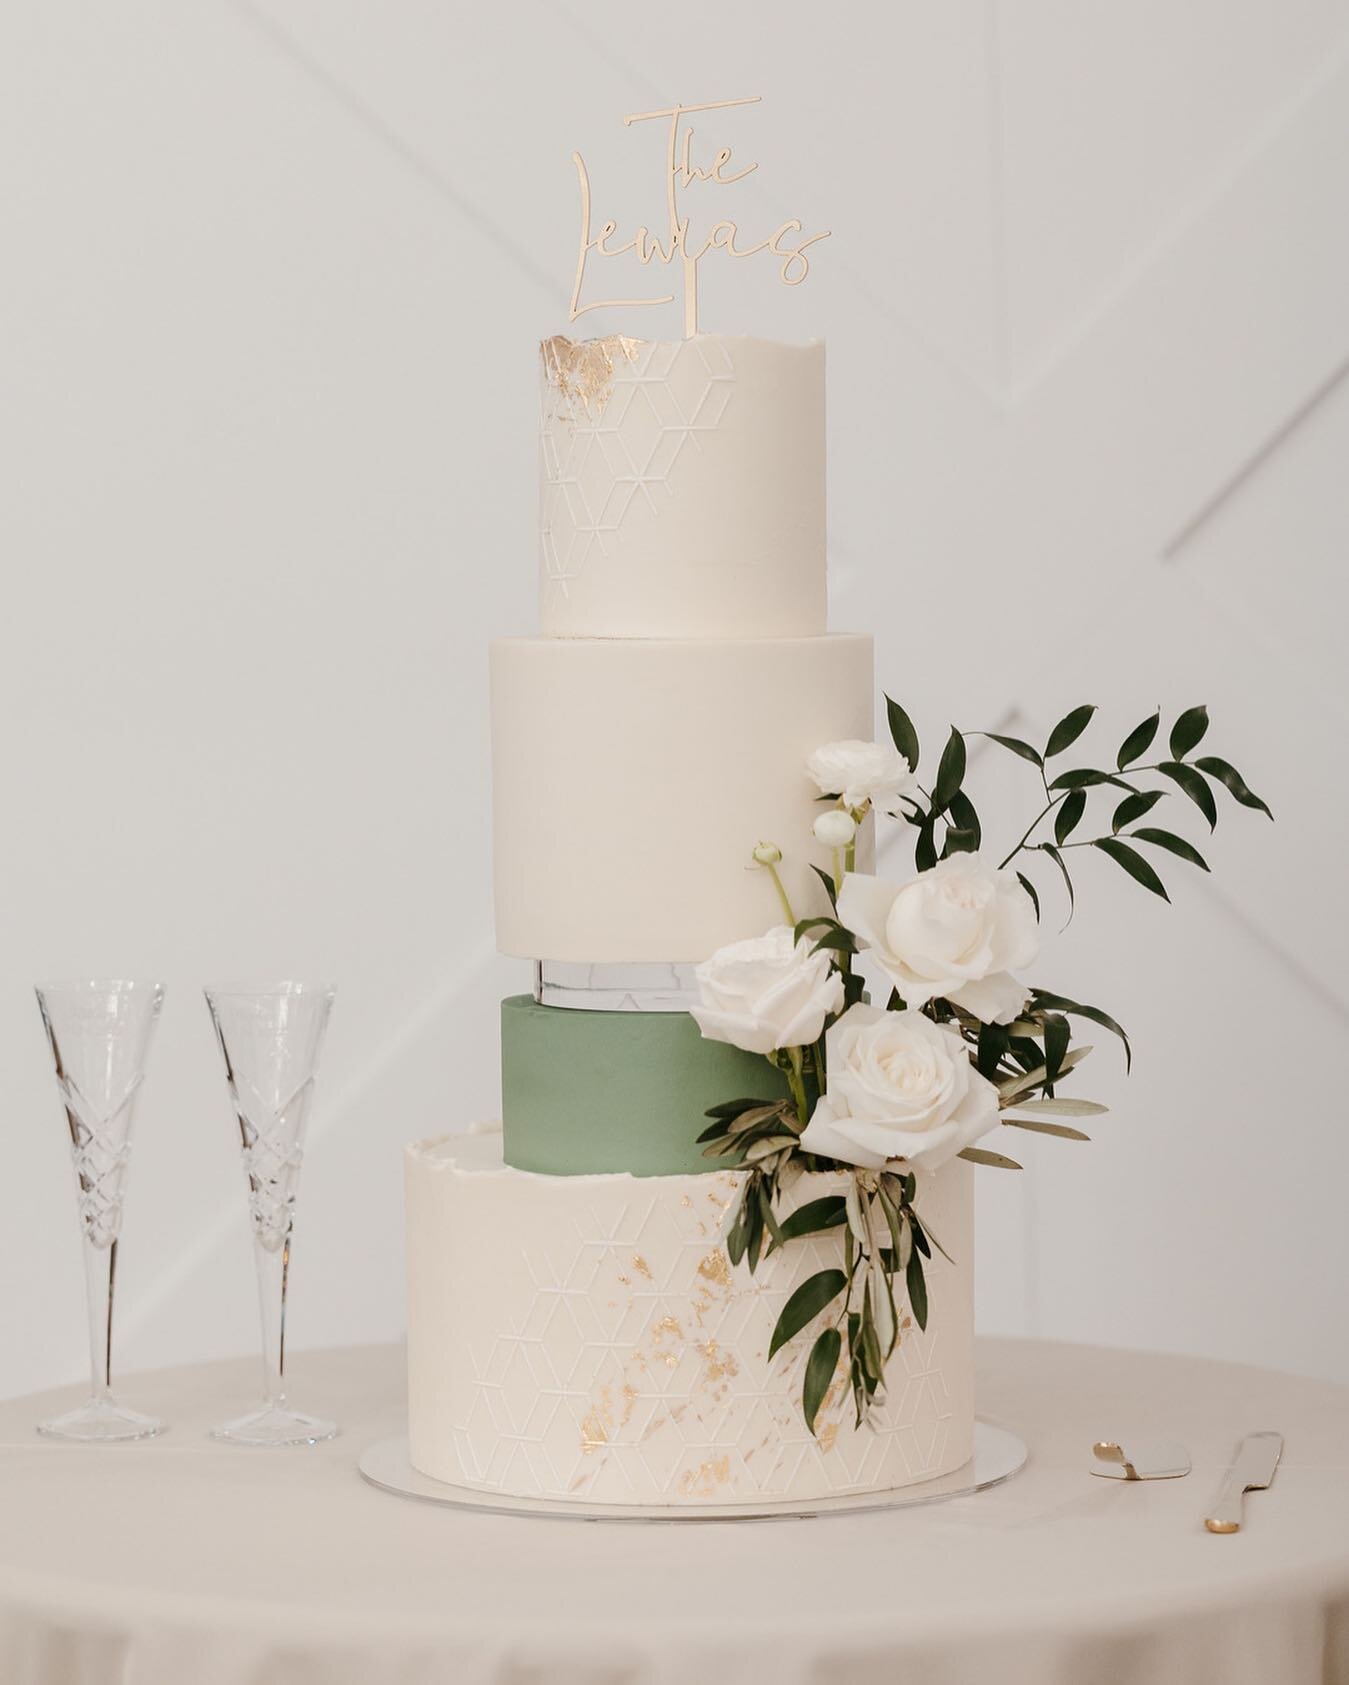 We hope your Monday is as sweet as this beautiful four-tiered wedding cake by @buckinghamcakes.ict 🤍🍃✨
⠀⠀⠀⠀⠀⠀⠀⠀⠀
📸: alexbo.photo